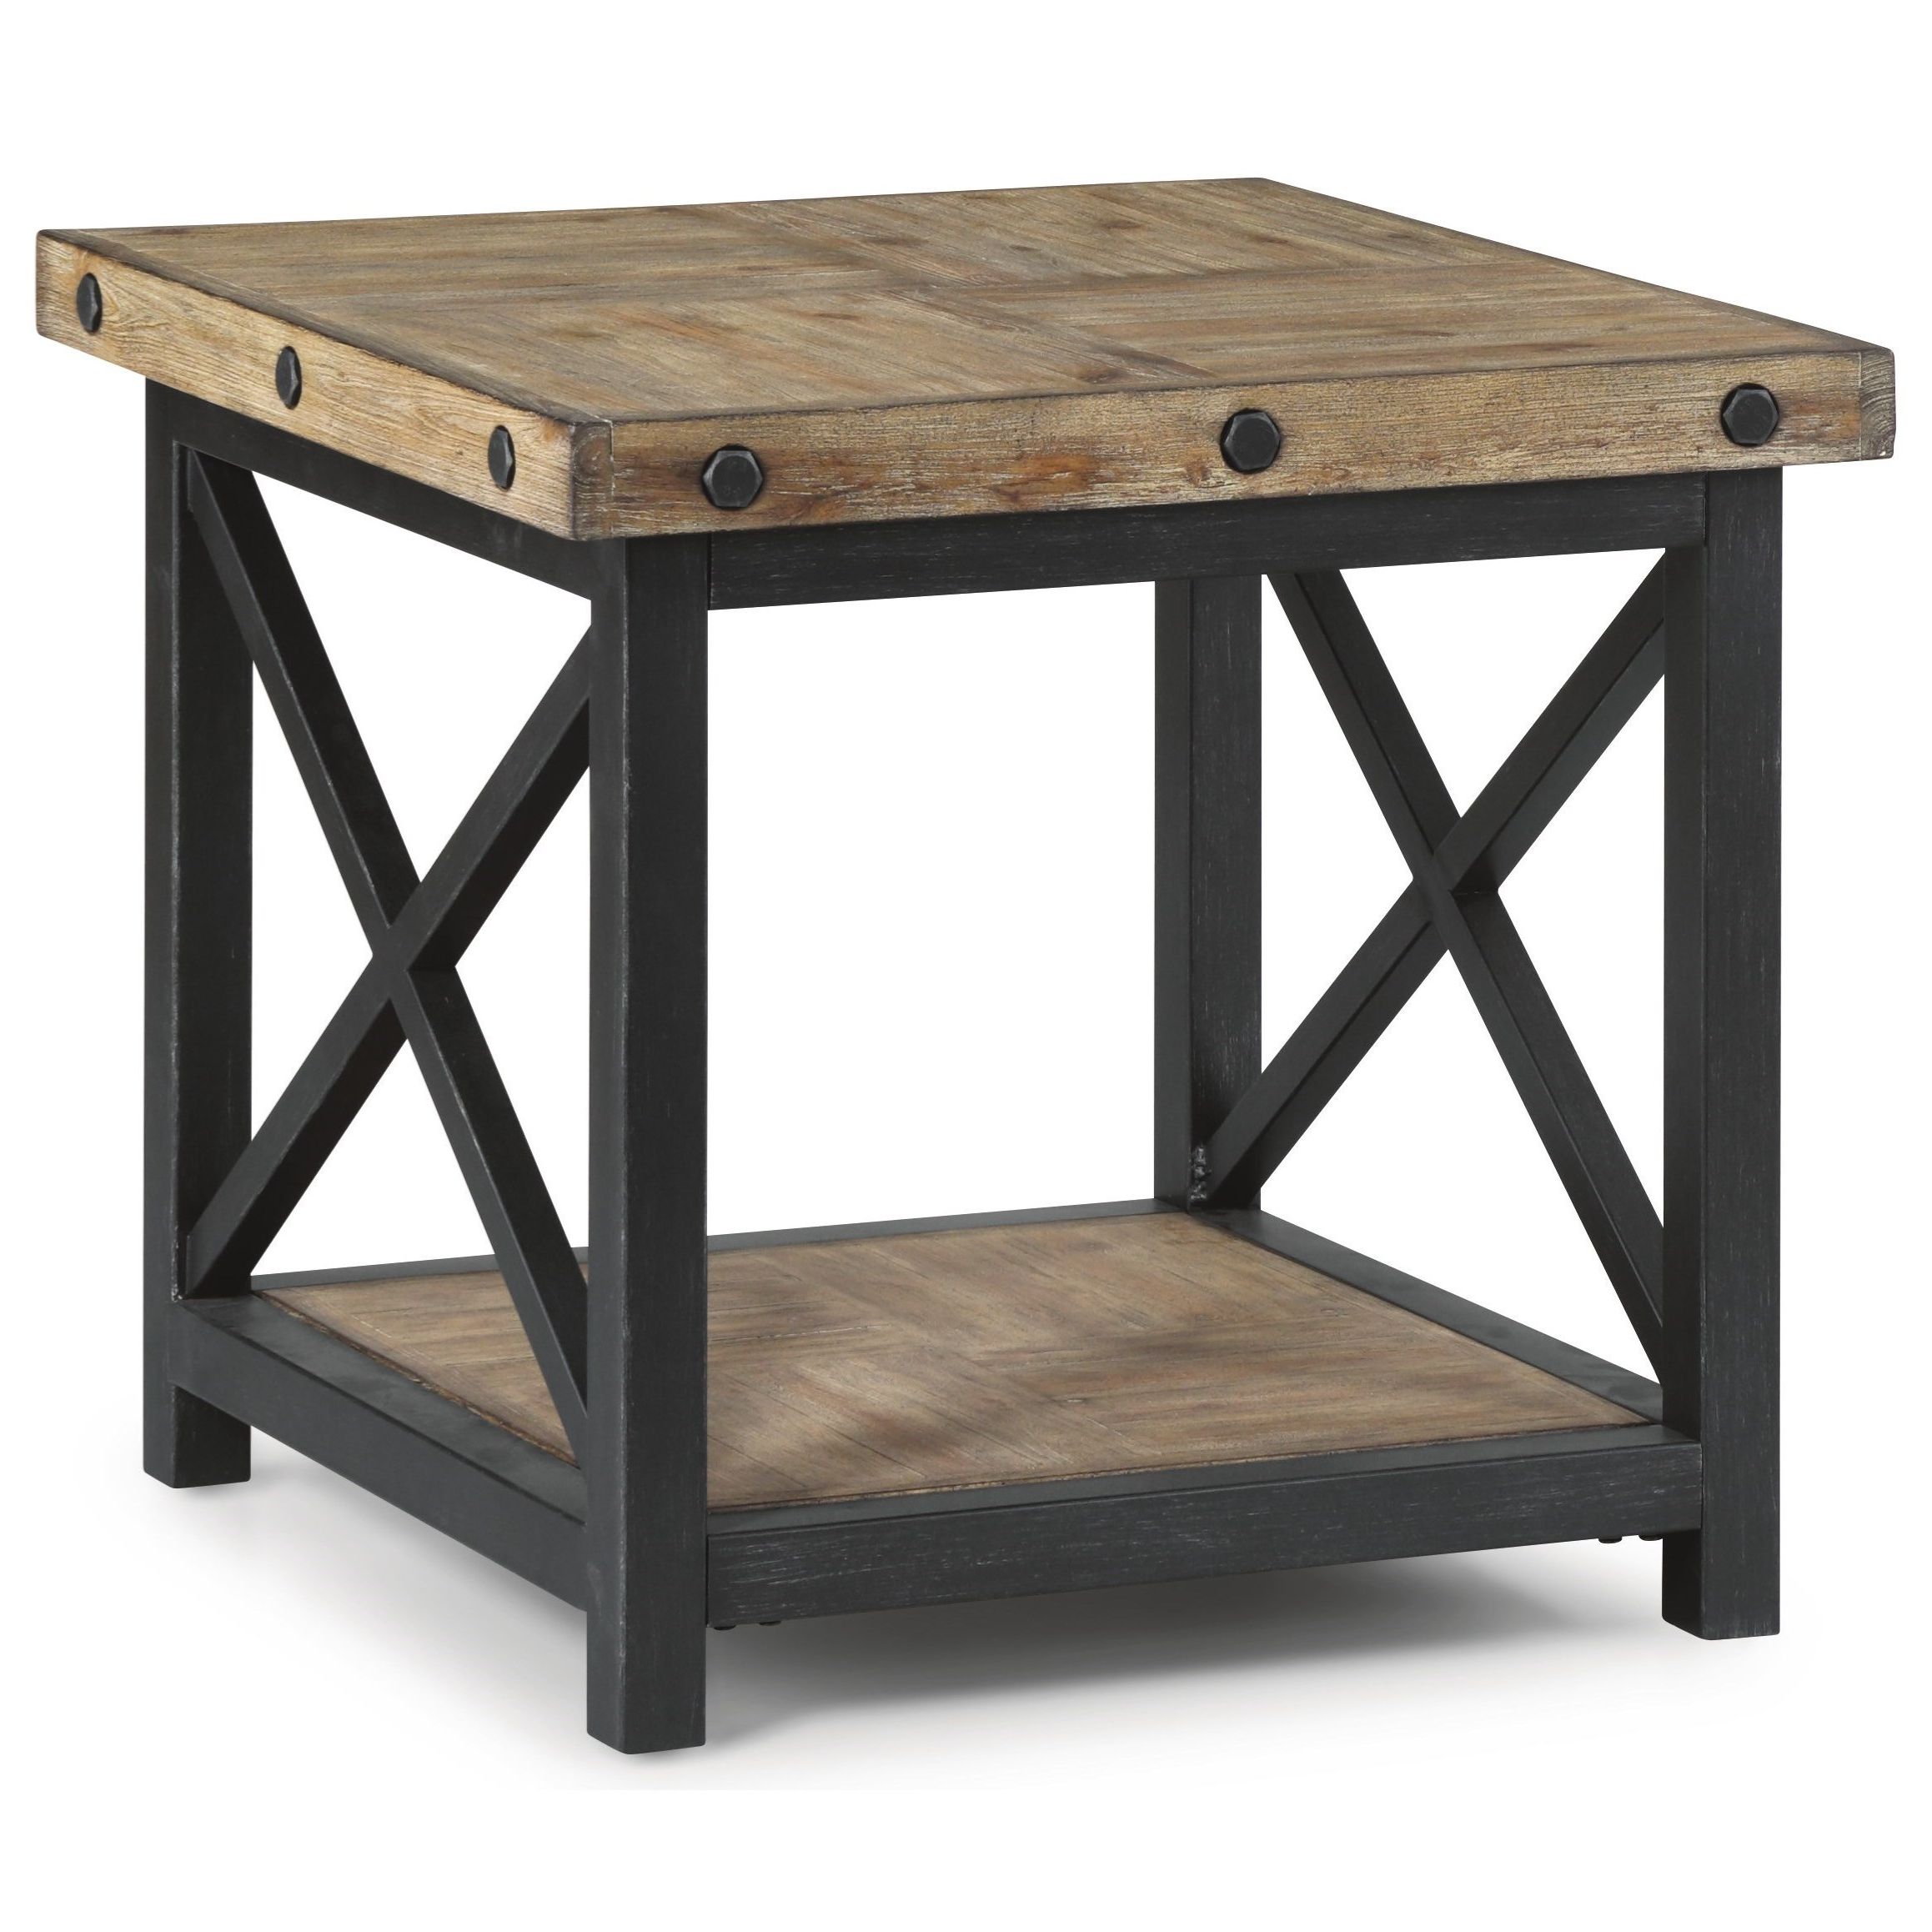 Fashionable Wynwood, A Flexsteel Company Carpenter Square End Table Inside Square Modern Accent Tables (View 4 of 20)